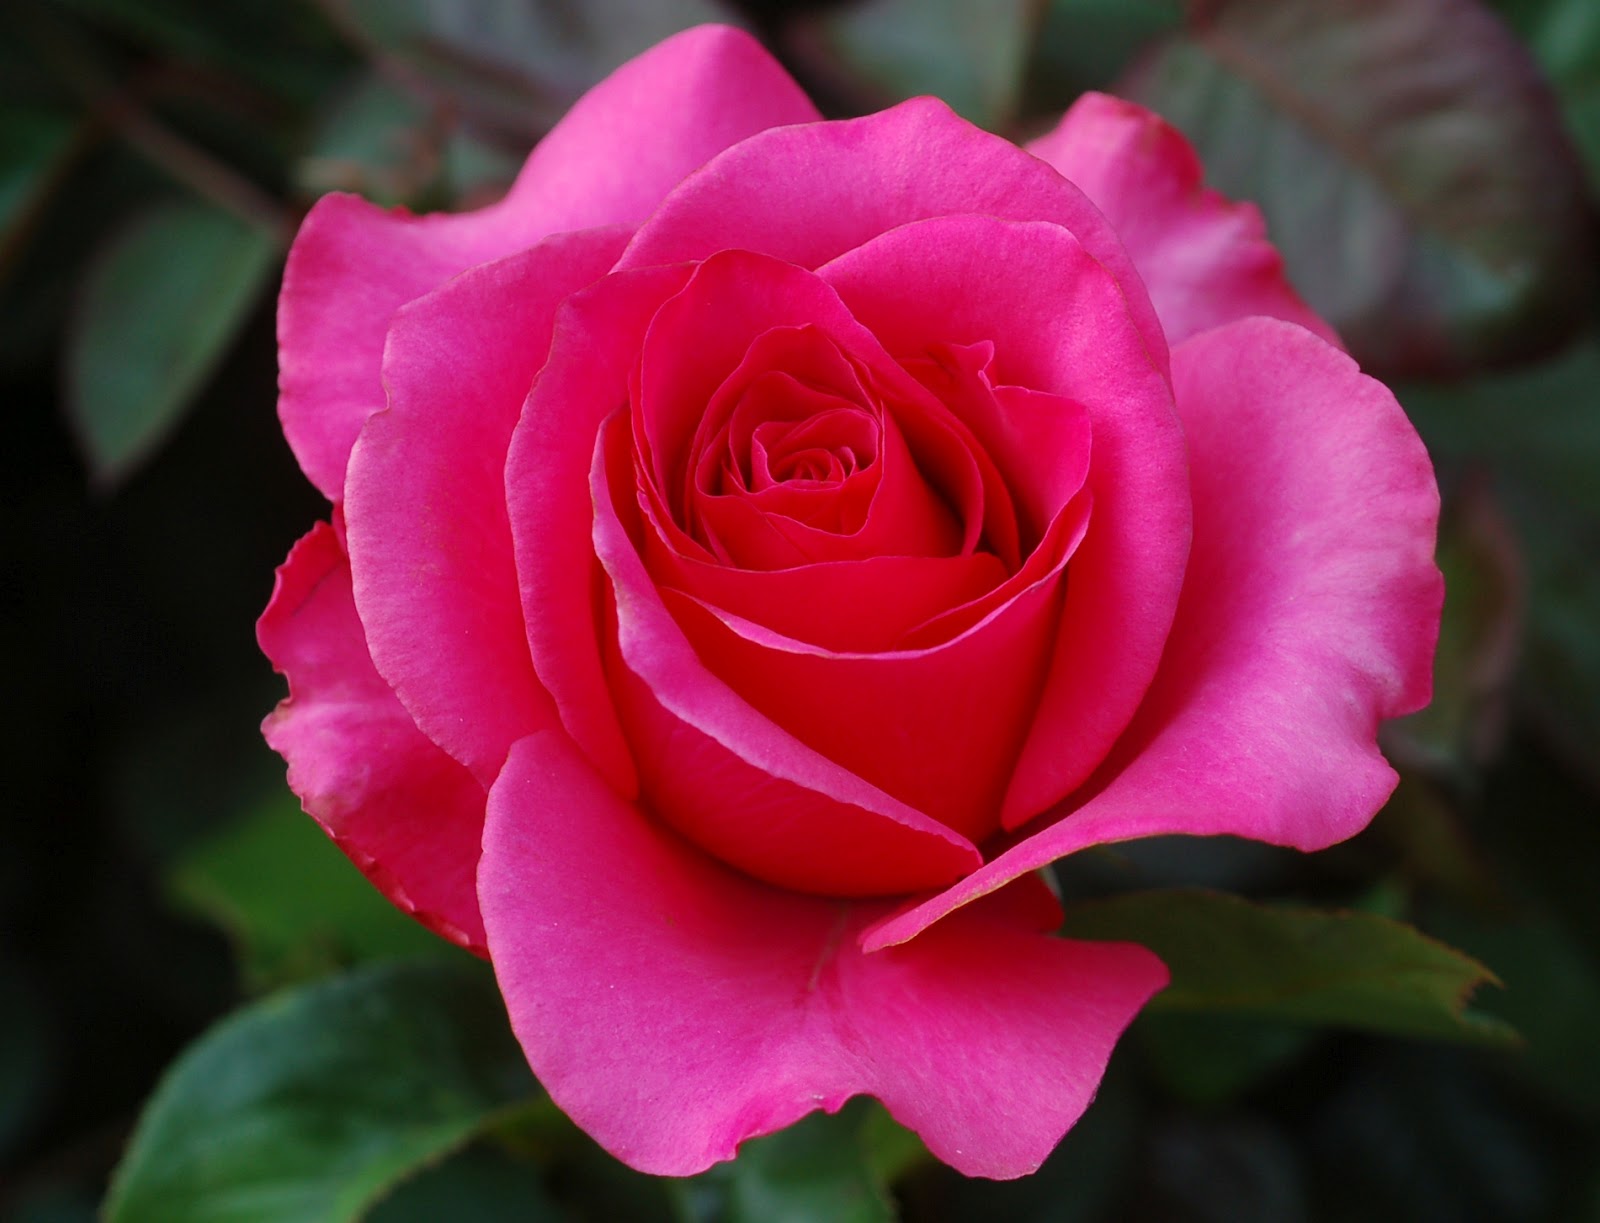 Beautiful Roses, Flowers Wallpapers, Stills, Images Gallery 